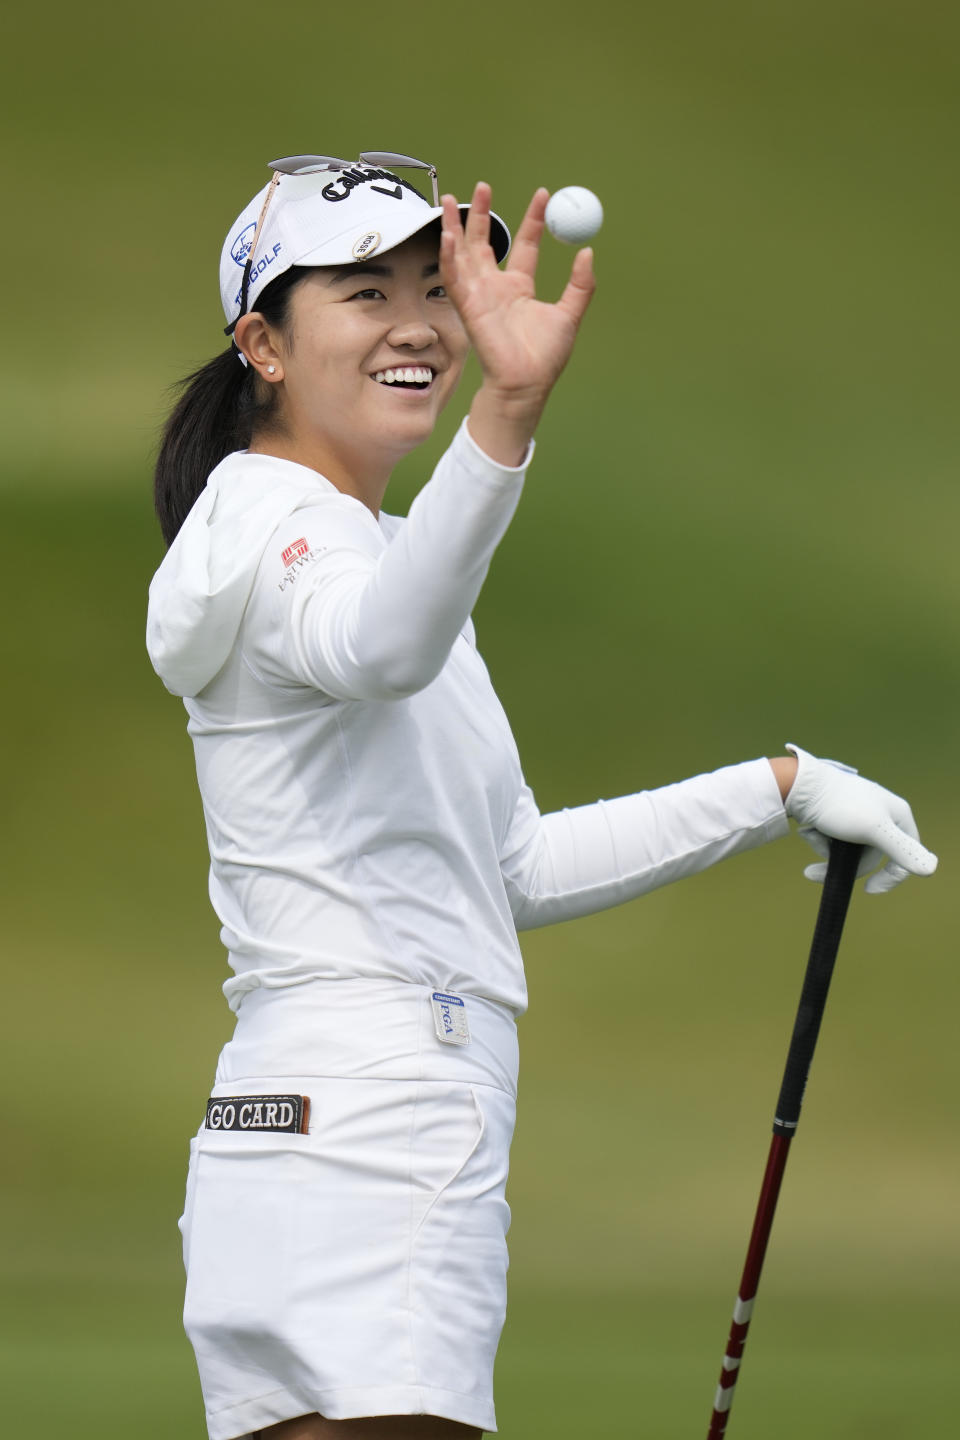 Rose Zhang smiles as she practices on the driving range ahead of the Women's PGA Championship golf tournament, Wednesday, June 21, 2023, in Springfield, N.J. (AP Photo/Seth Wenig)